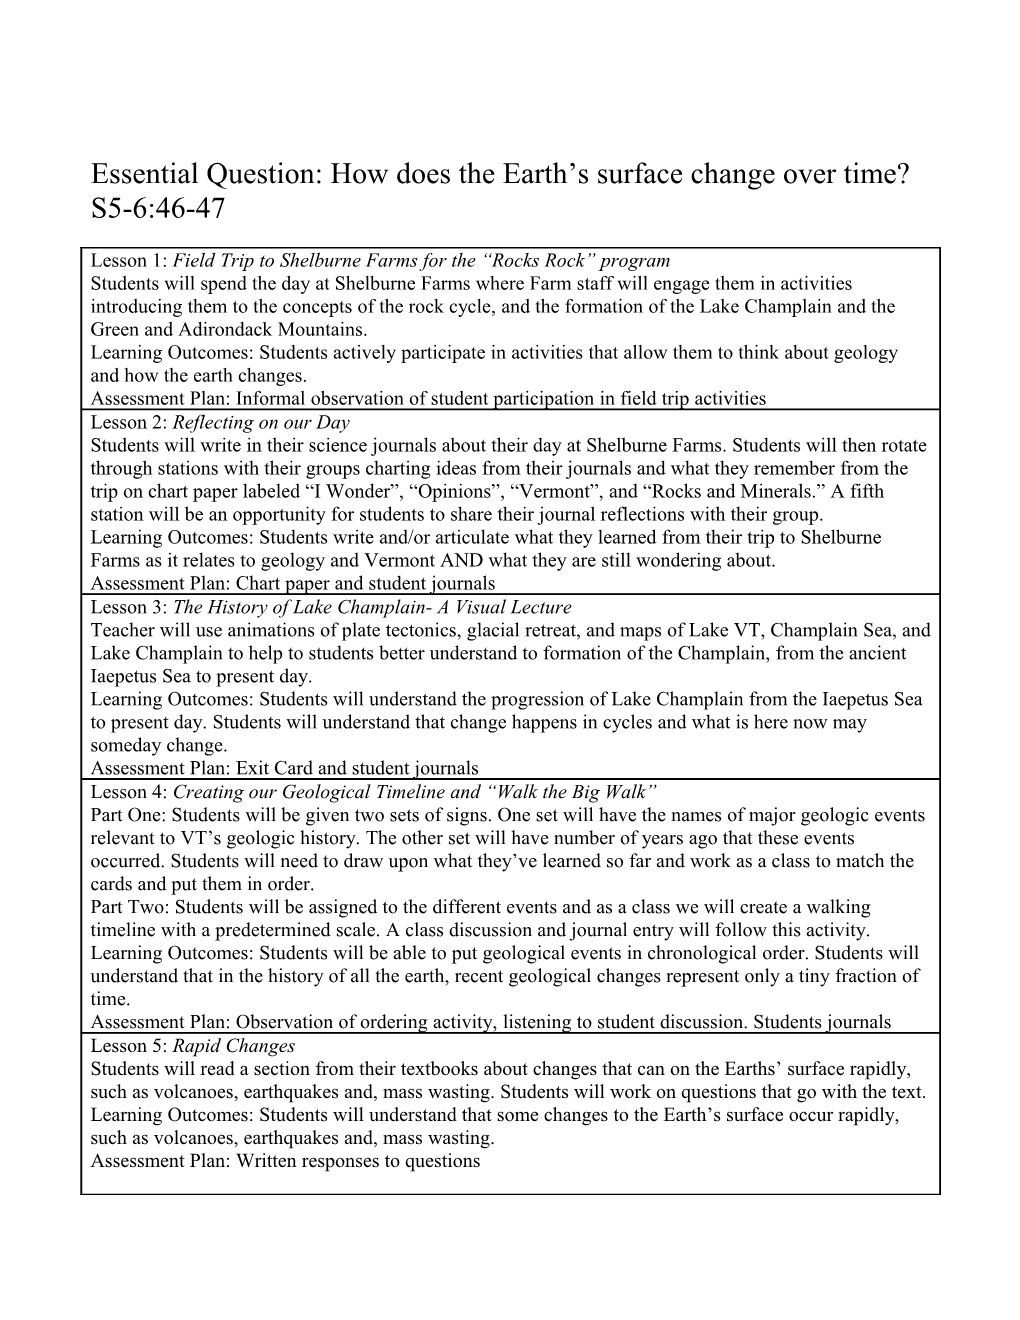 Essential Question: How Does the Earth S Surface Change Over Time